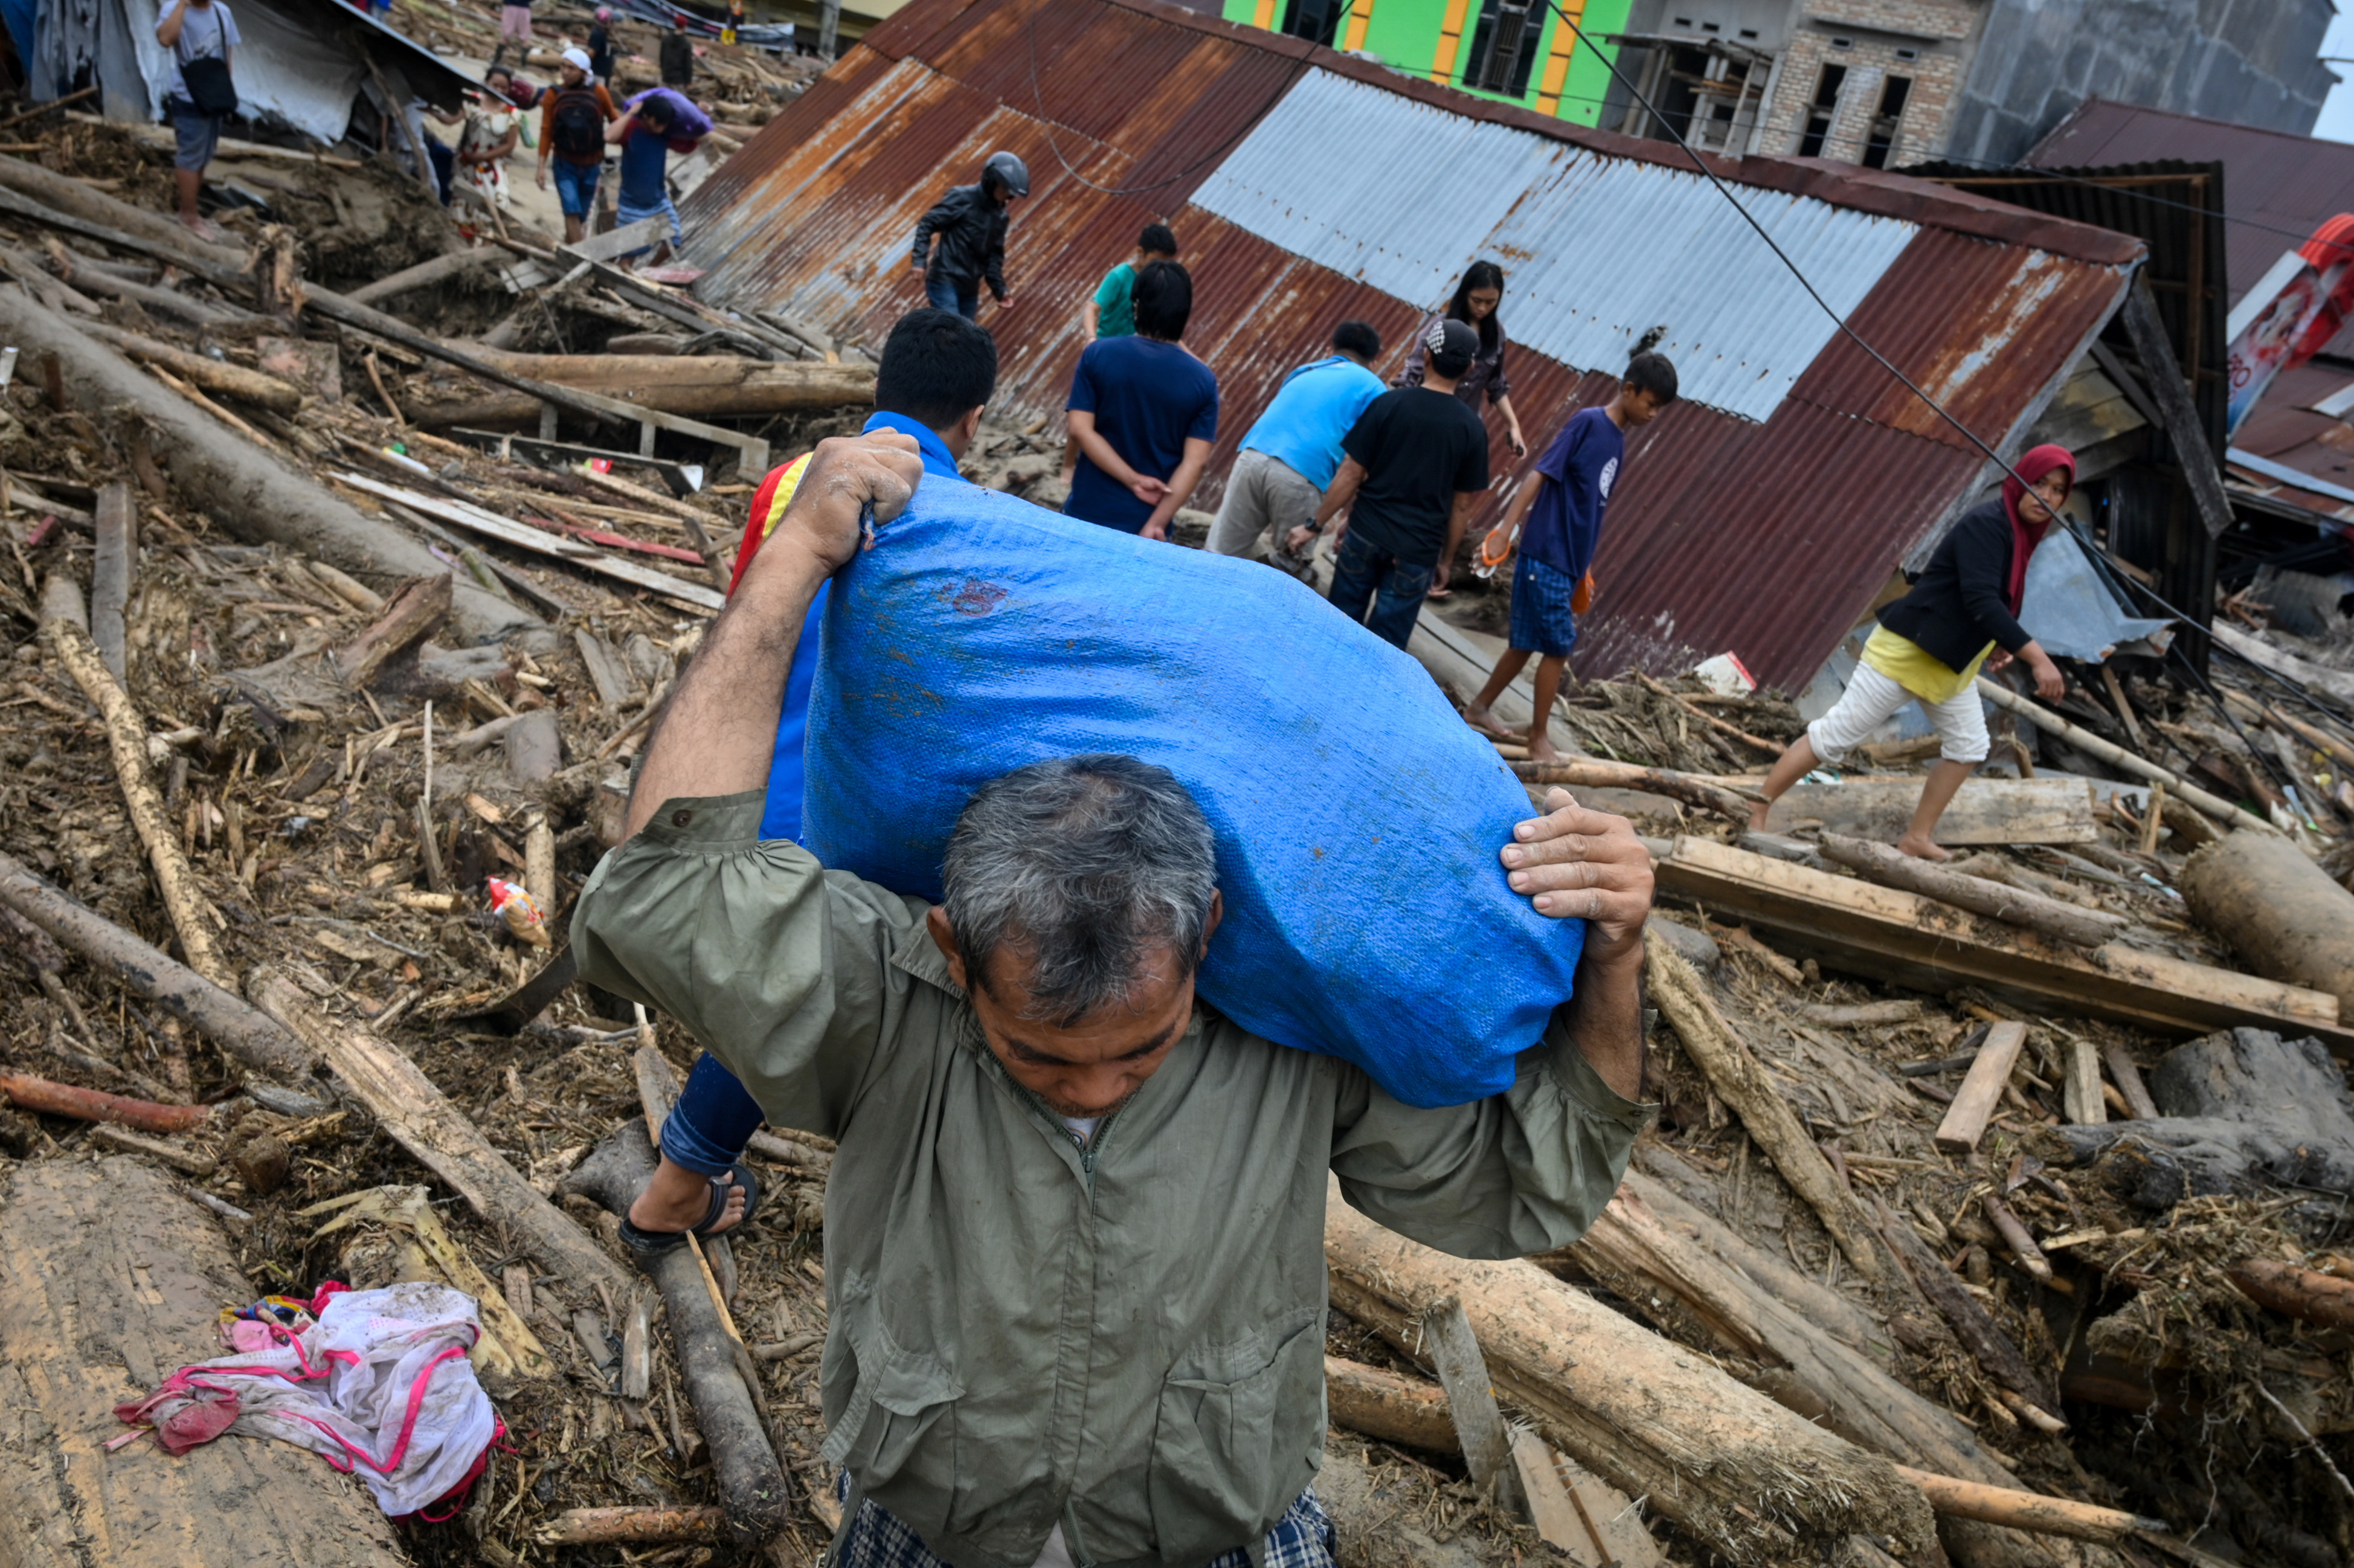 Villagers evacuate their homes following flash floods in South Sulawesi. (PHOTO: AFP / Hariandi HAFID) 